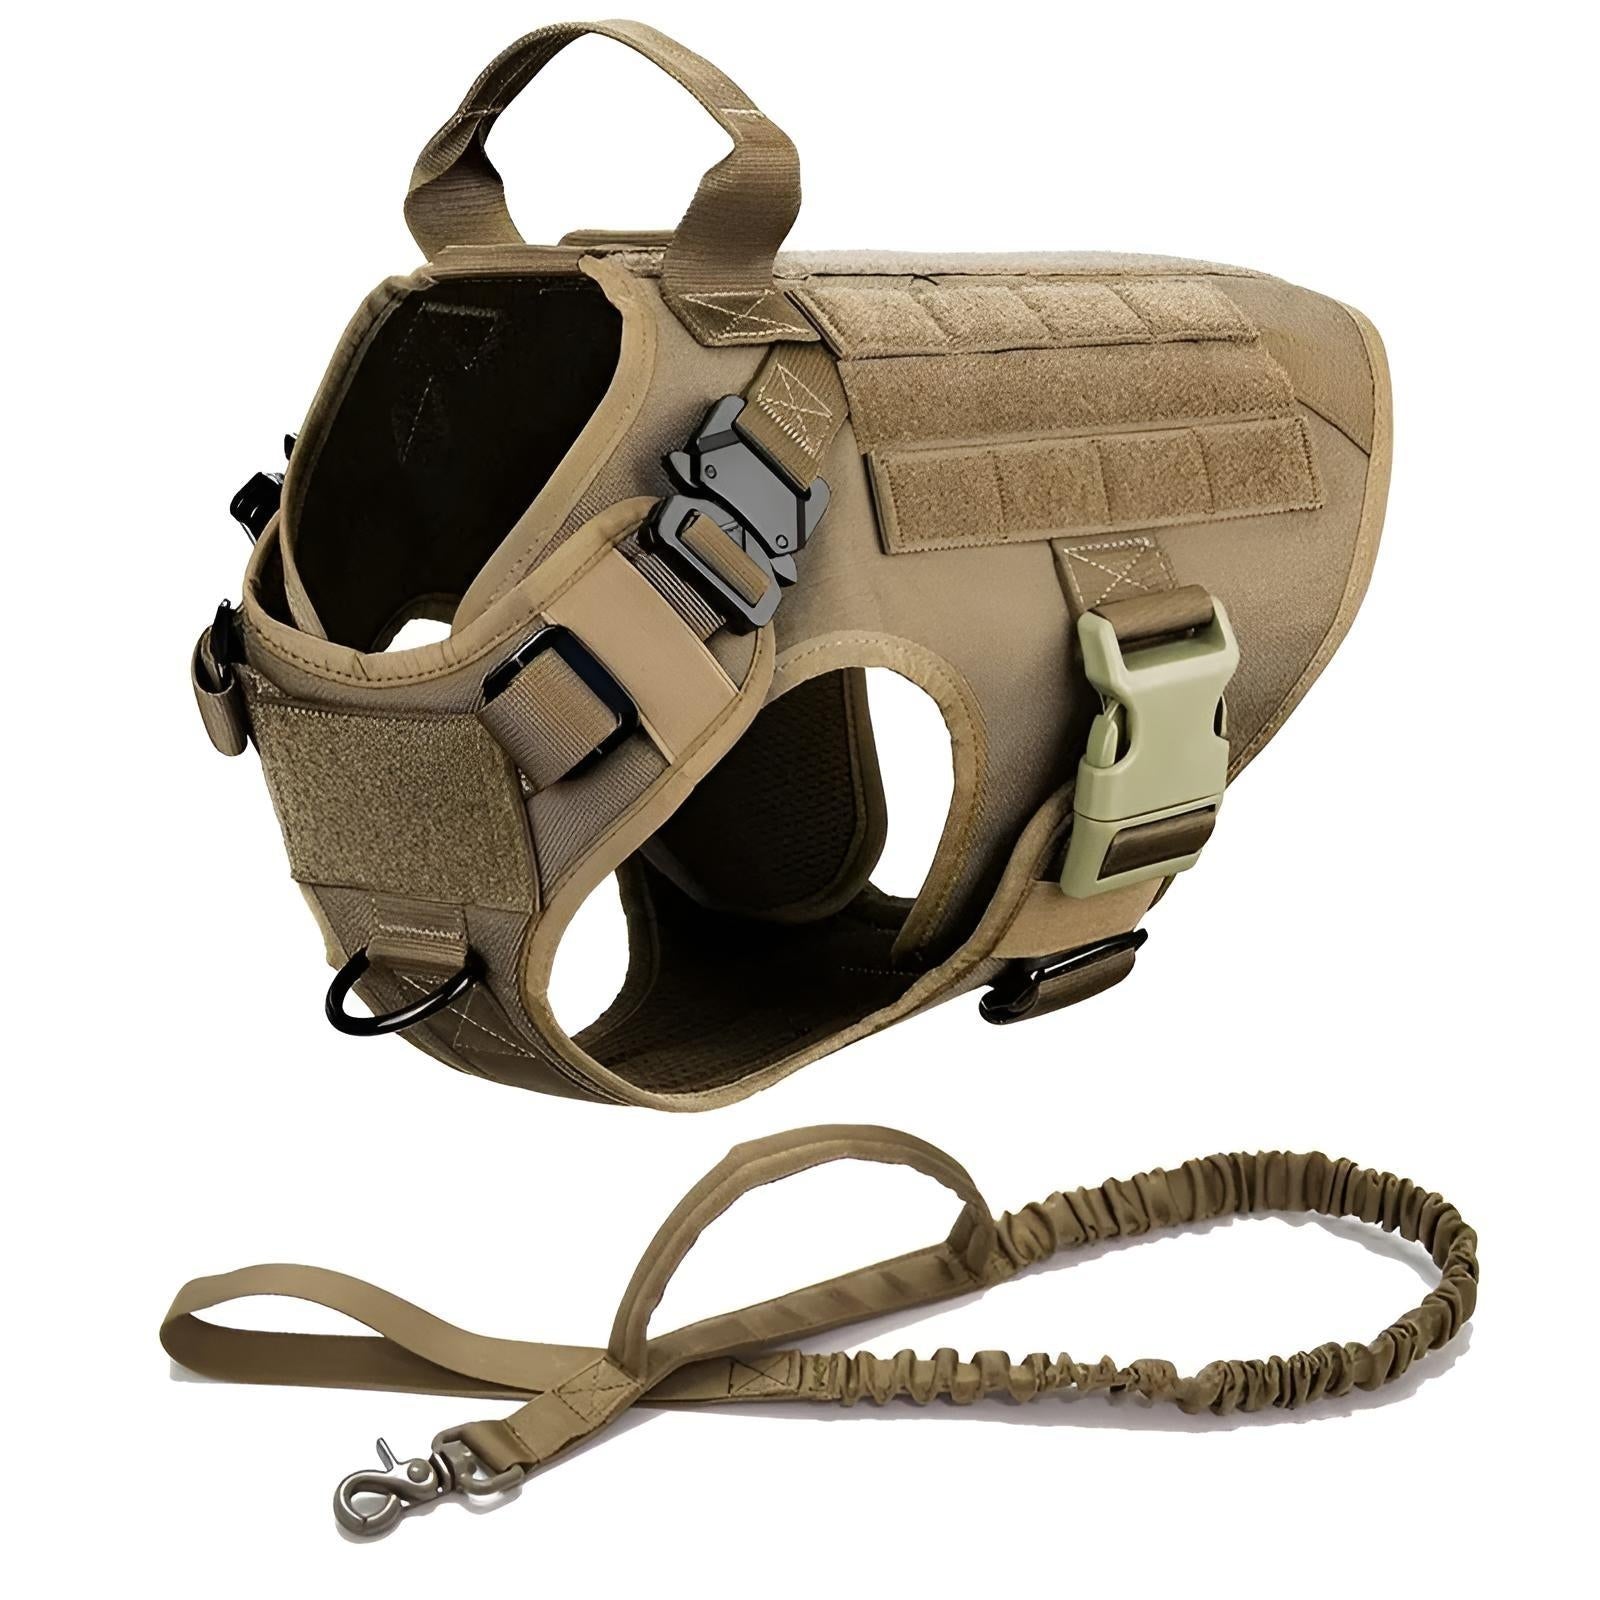 icefang tactical dog harness brown